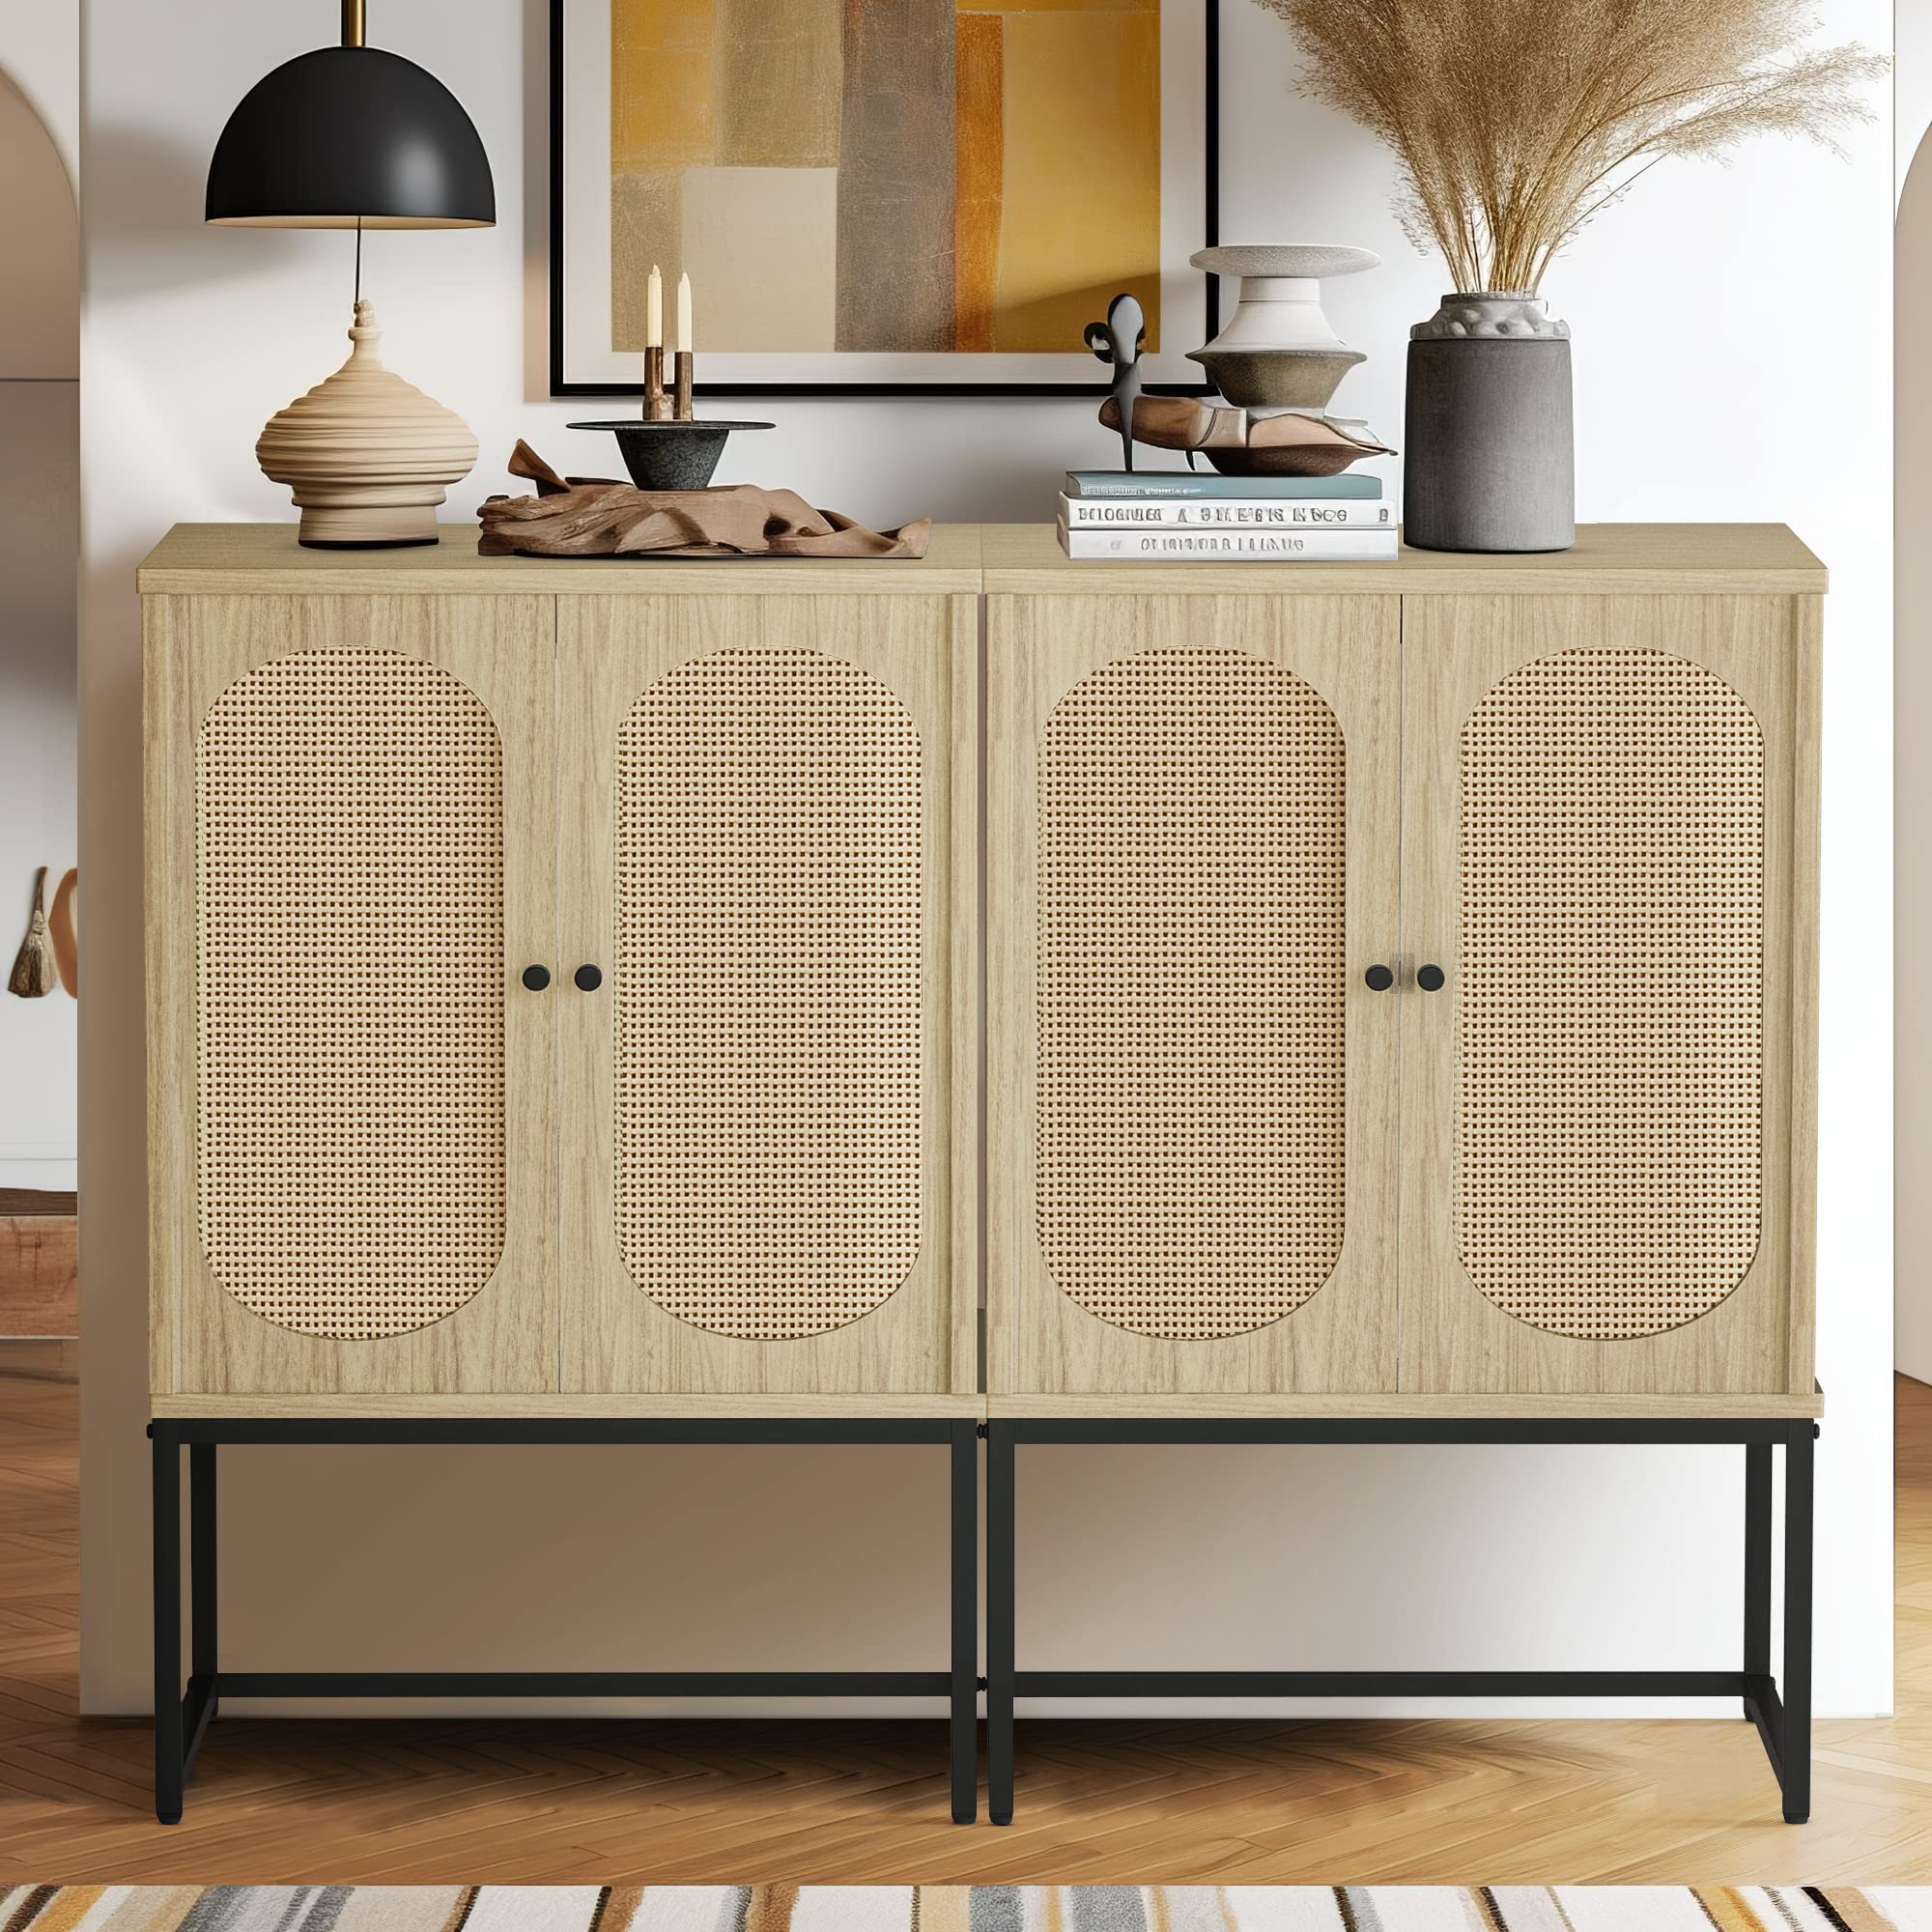 Lamerge Rattan Cabinet,2 Door Sideboard Buffet Cupboard Accent High Cabinet with Natural Rattan,Free Standing Bookmatch,Adjustable Shelves,Easy Assembly,Rustic Oak Beige (LRC-ob)